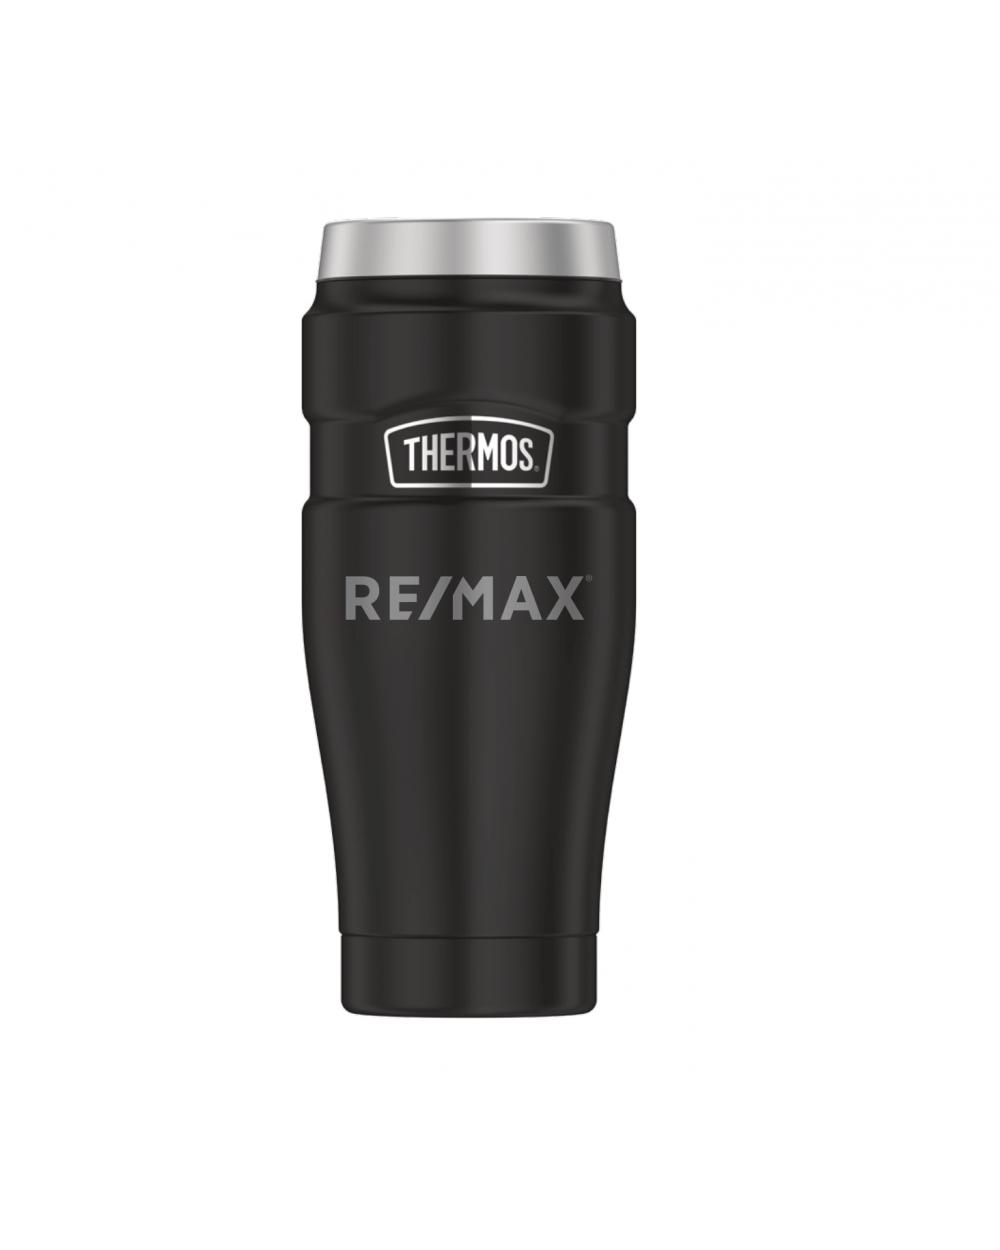 RE/MAX 16 oz. Thermos® Stainless King™ Stainless Steel Travel Mug